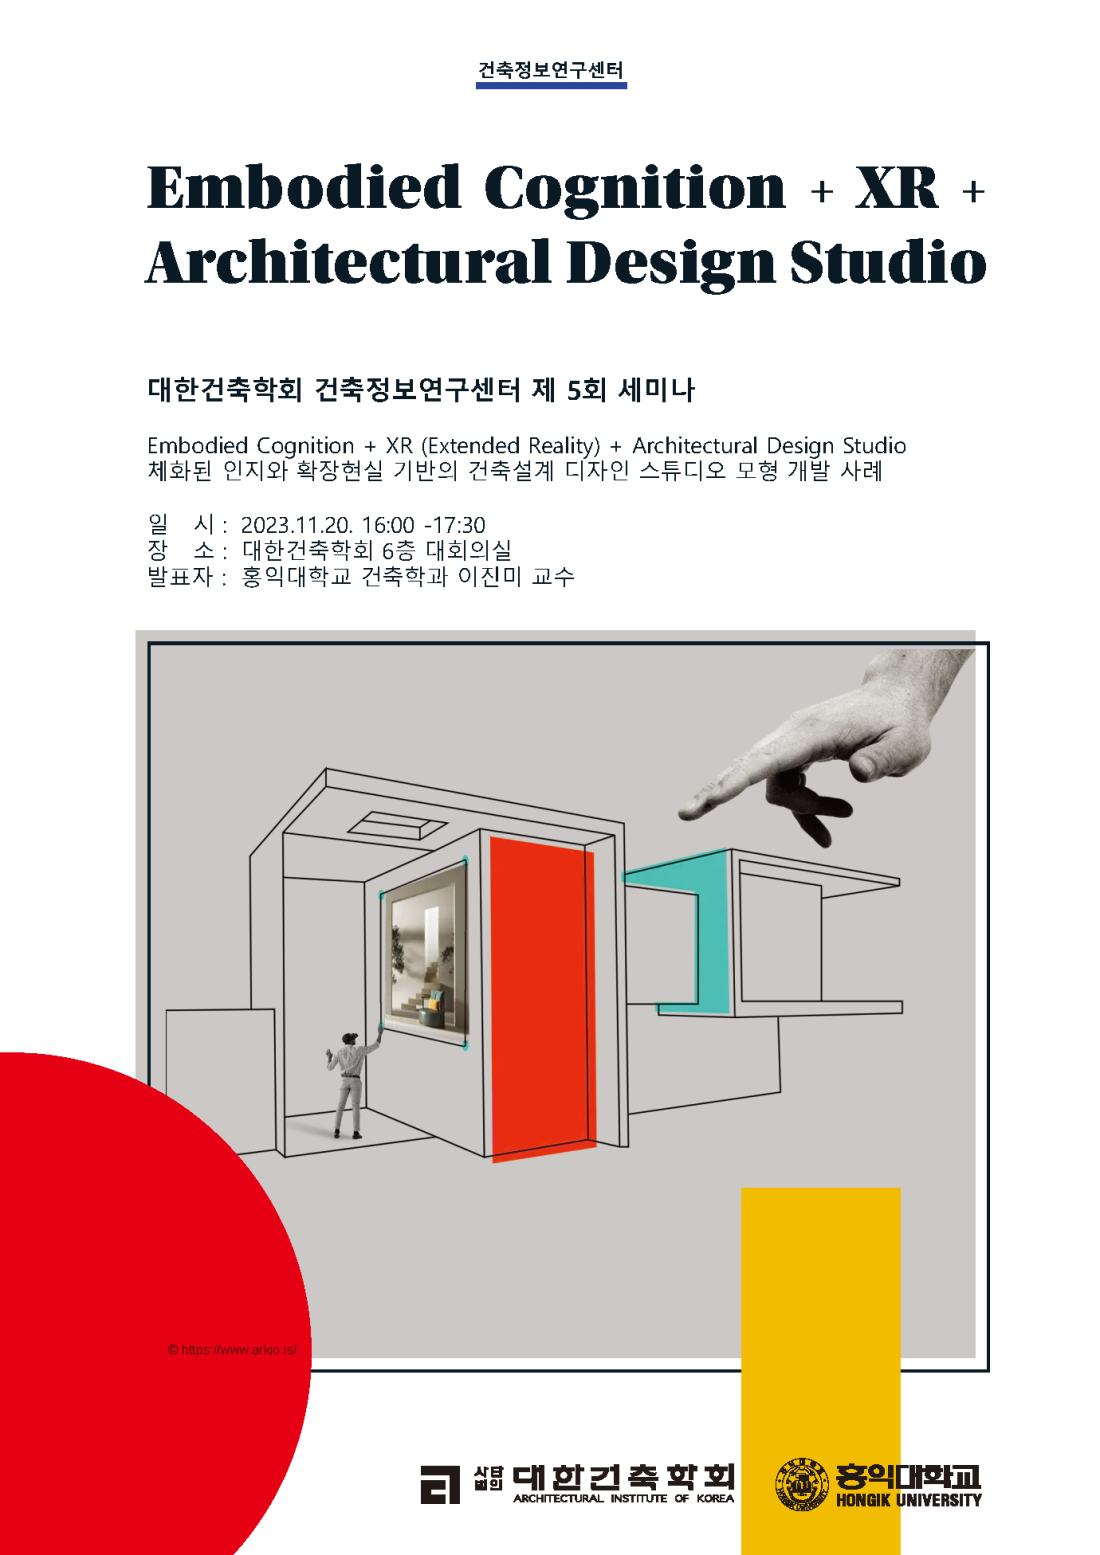 You are currently viewing 11/20) 건축정보연구센터 공개세미나 개최 안내 – Embodied Cognition + XR + Architectural Design Studio